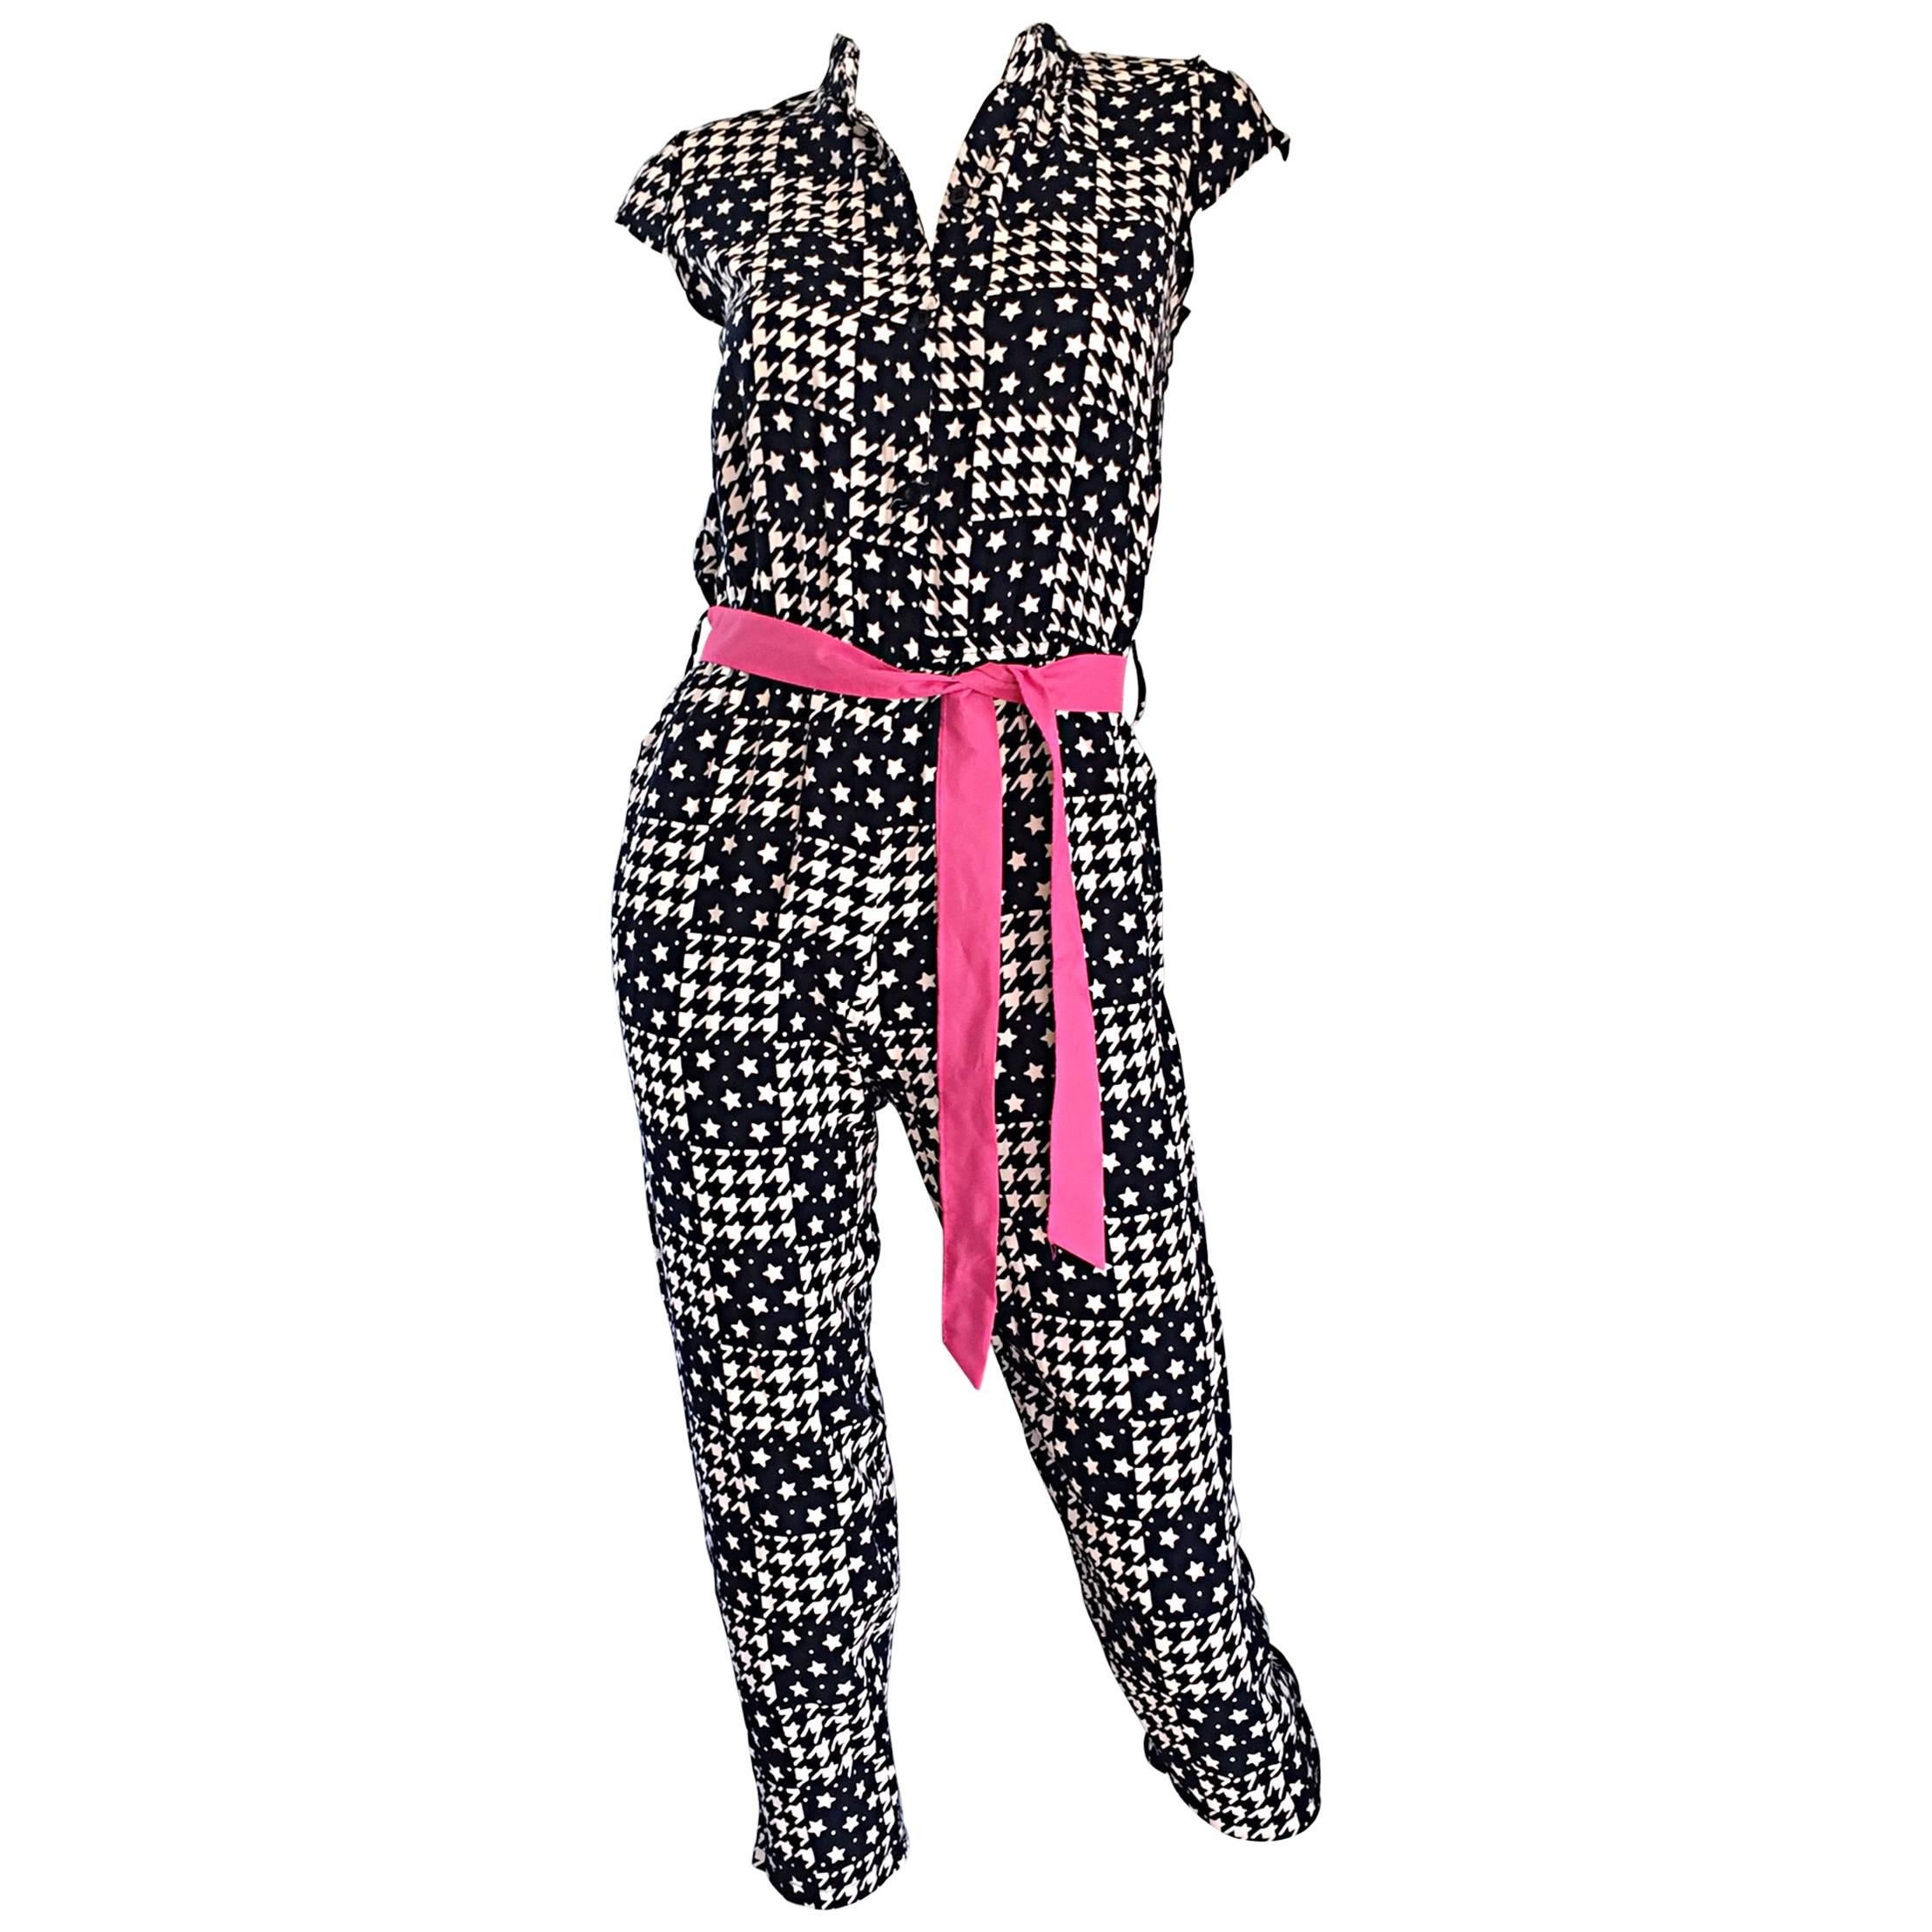 Amazing Vintage 80s Houndstooth and Star Print Navy White Jumpsuit w/ Pink Belt For Sale